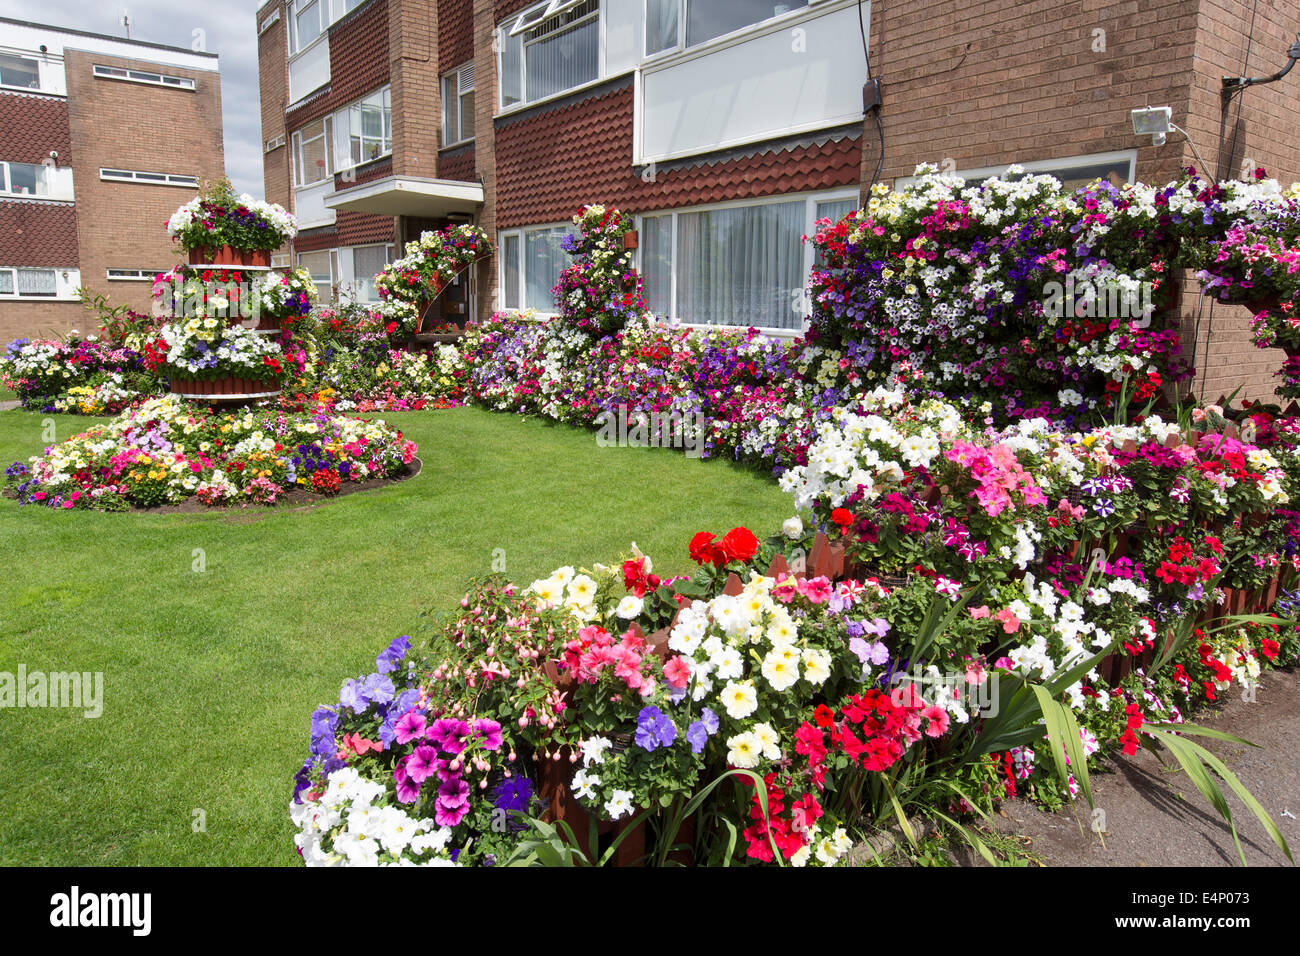 Brightly coloured flowers in a garden at a block of flats in Solihull, UK Stock Photo